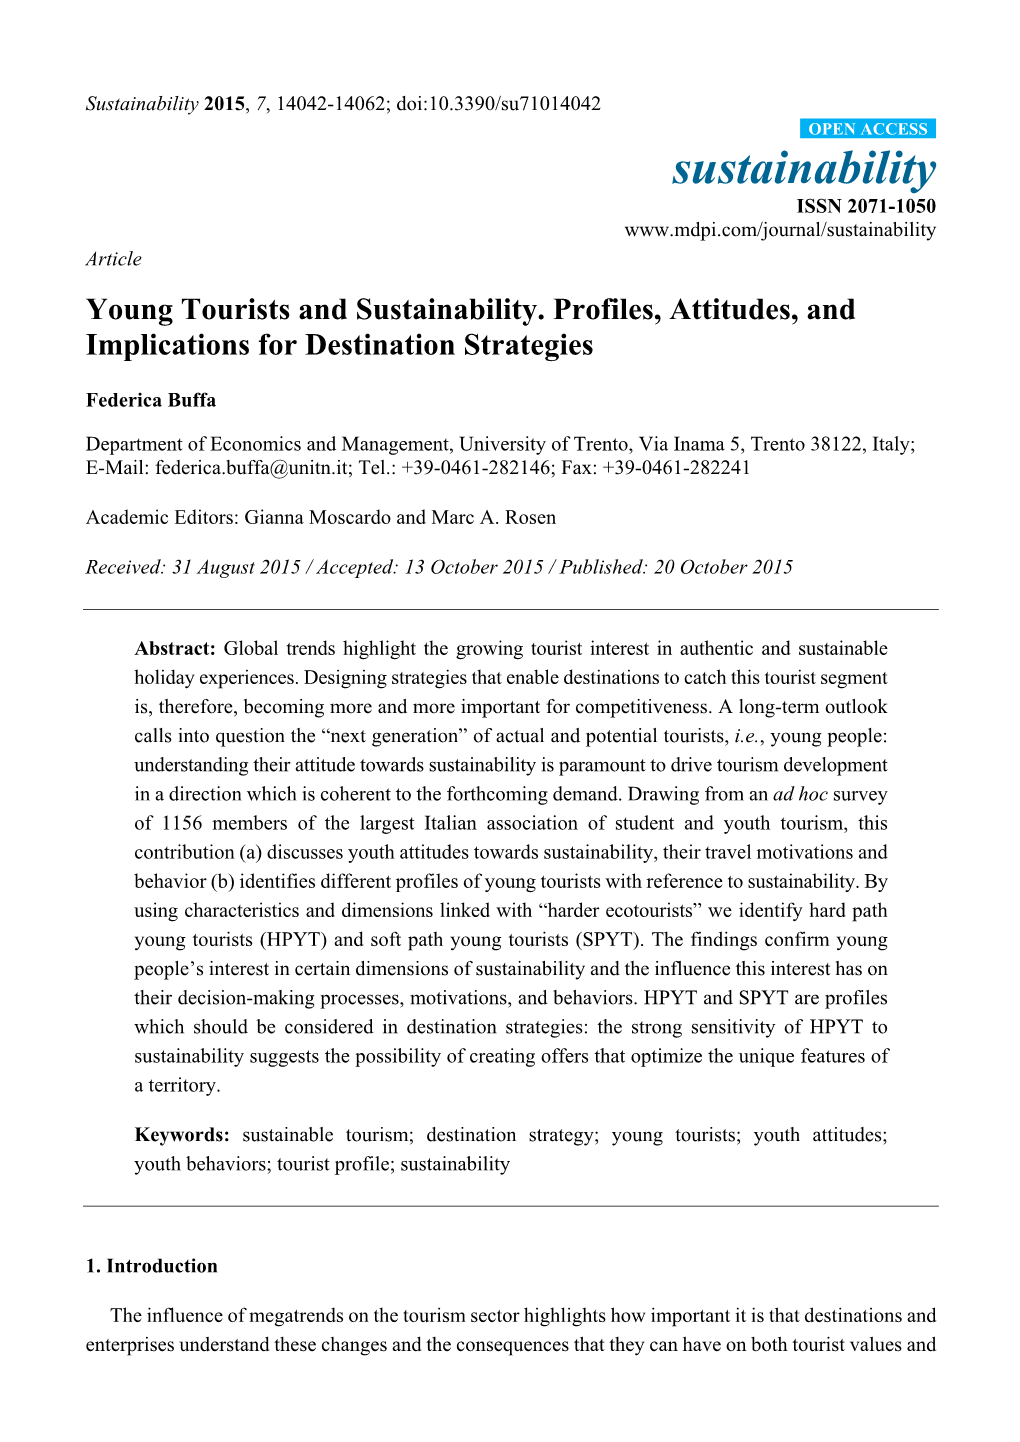 Young Tourists and Sustainability. Profiles, Attitudes, and Implications for Destination Strategies